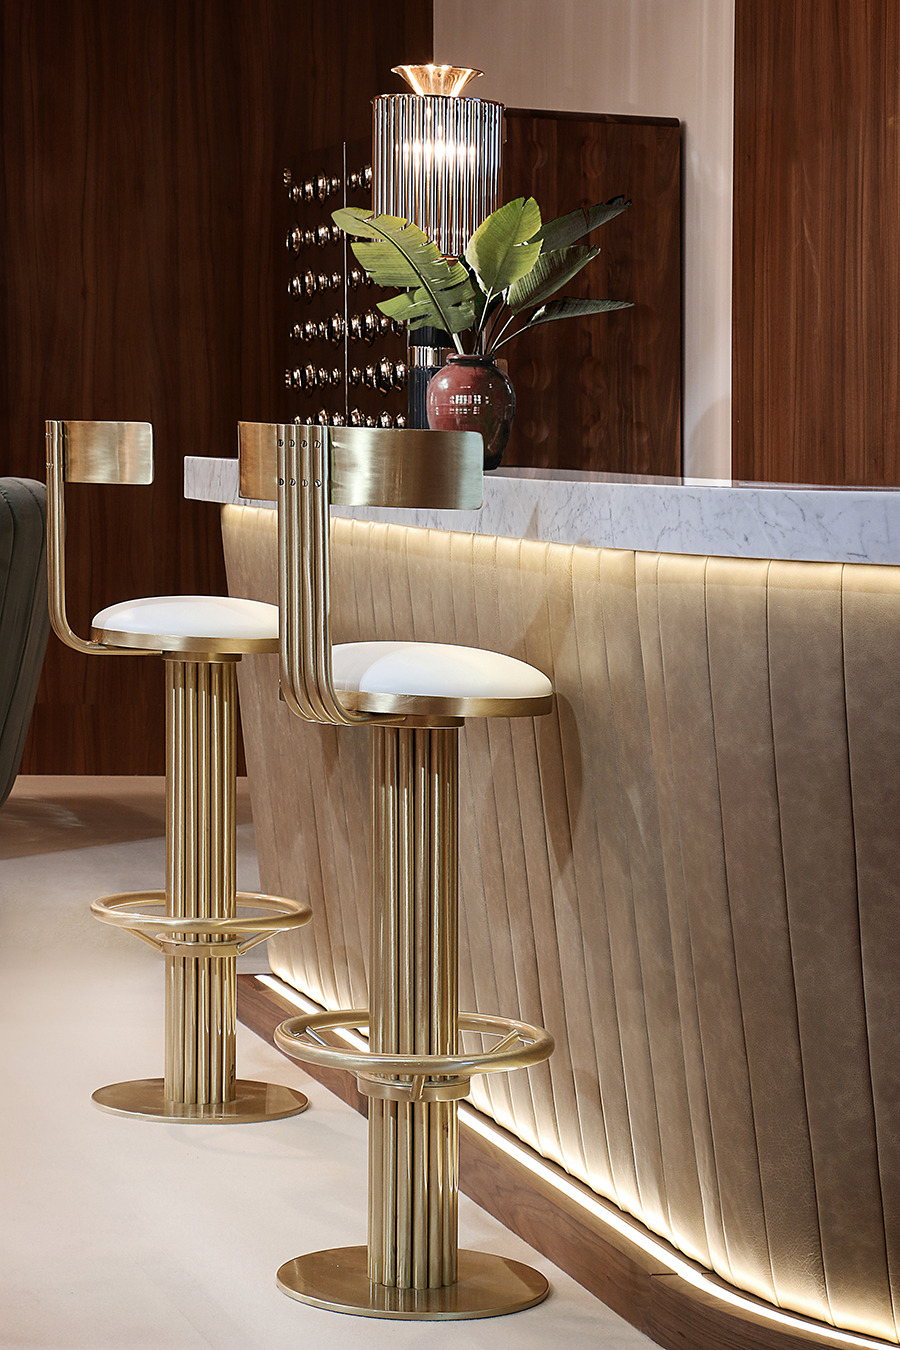 How to Choose the Best Bar Stool